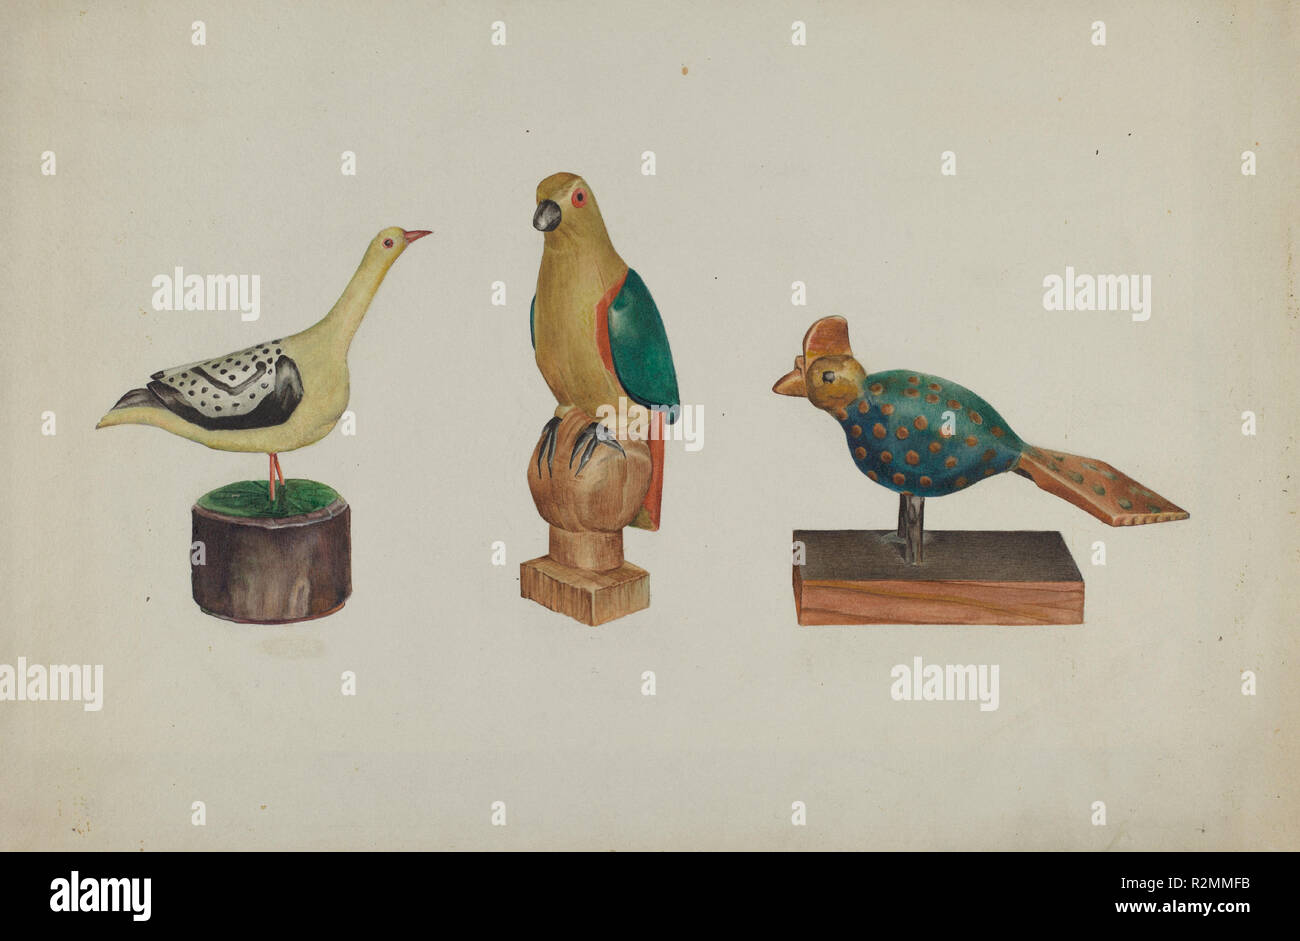 Pa. German Three Carved and Painted Birds. Dated: c. 1937. Dimensions: overall: 23.6 x 35.6 cm (9 5/16 x 14 in.)  Original IAD Object: 7' high. Medium: watercolor, graphite, and colored pencil on paper. Museum: National Gallery of Art, Washington DC. Author: Victor F. Muollo. Stock Photo